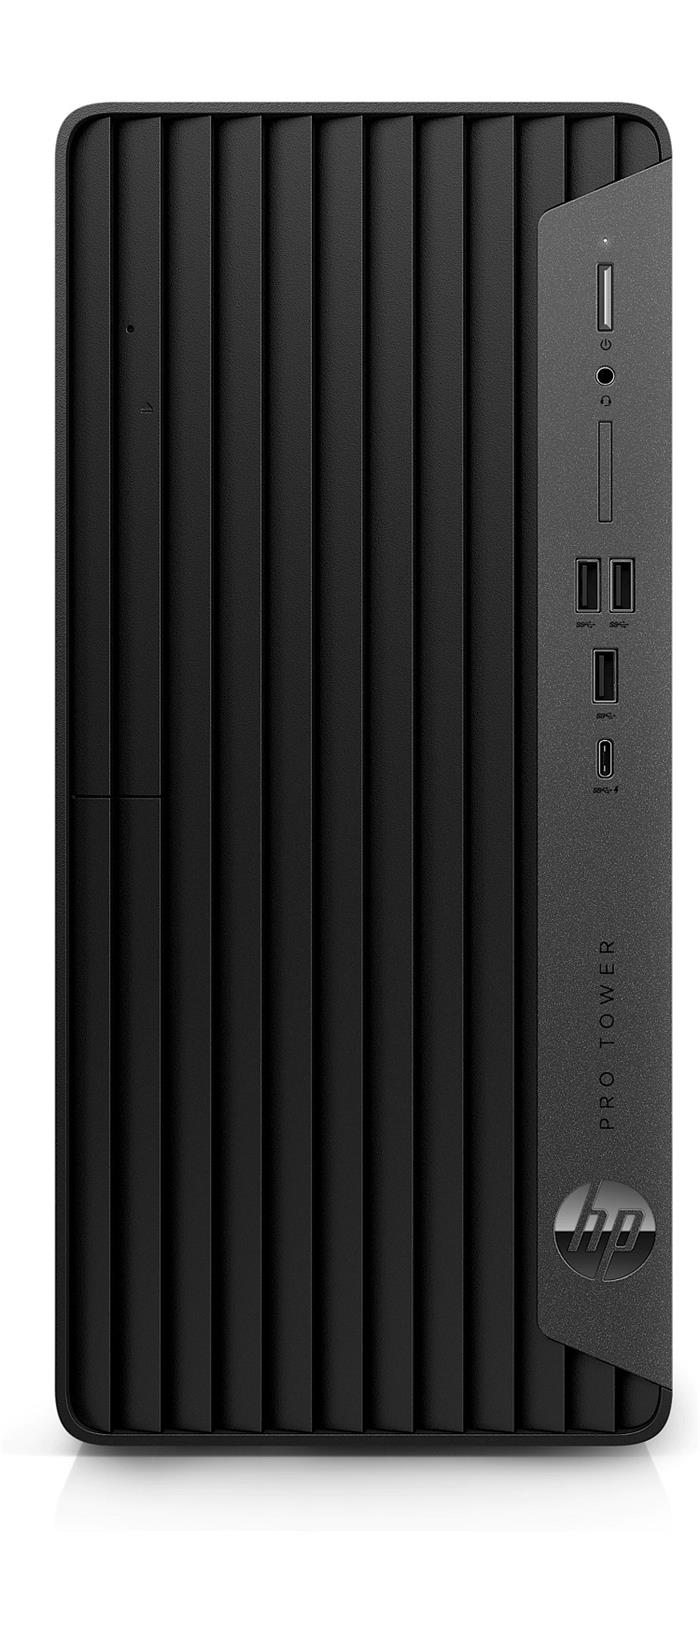 HP Pro 400 G9 Tower